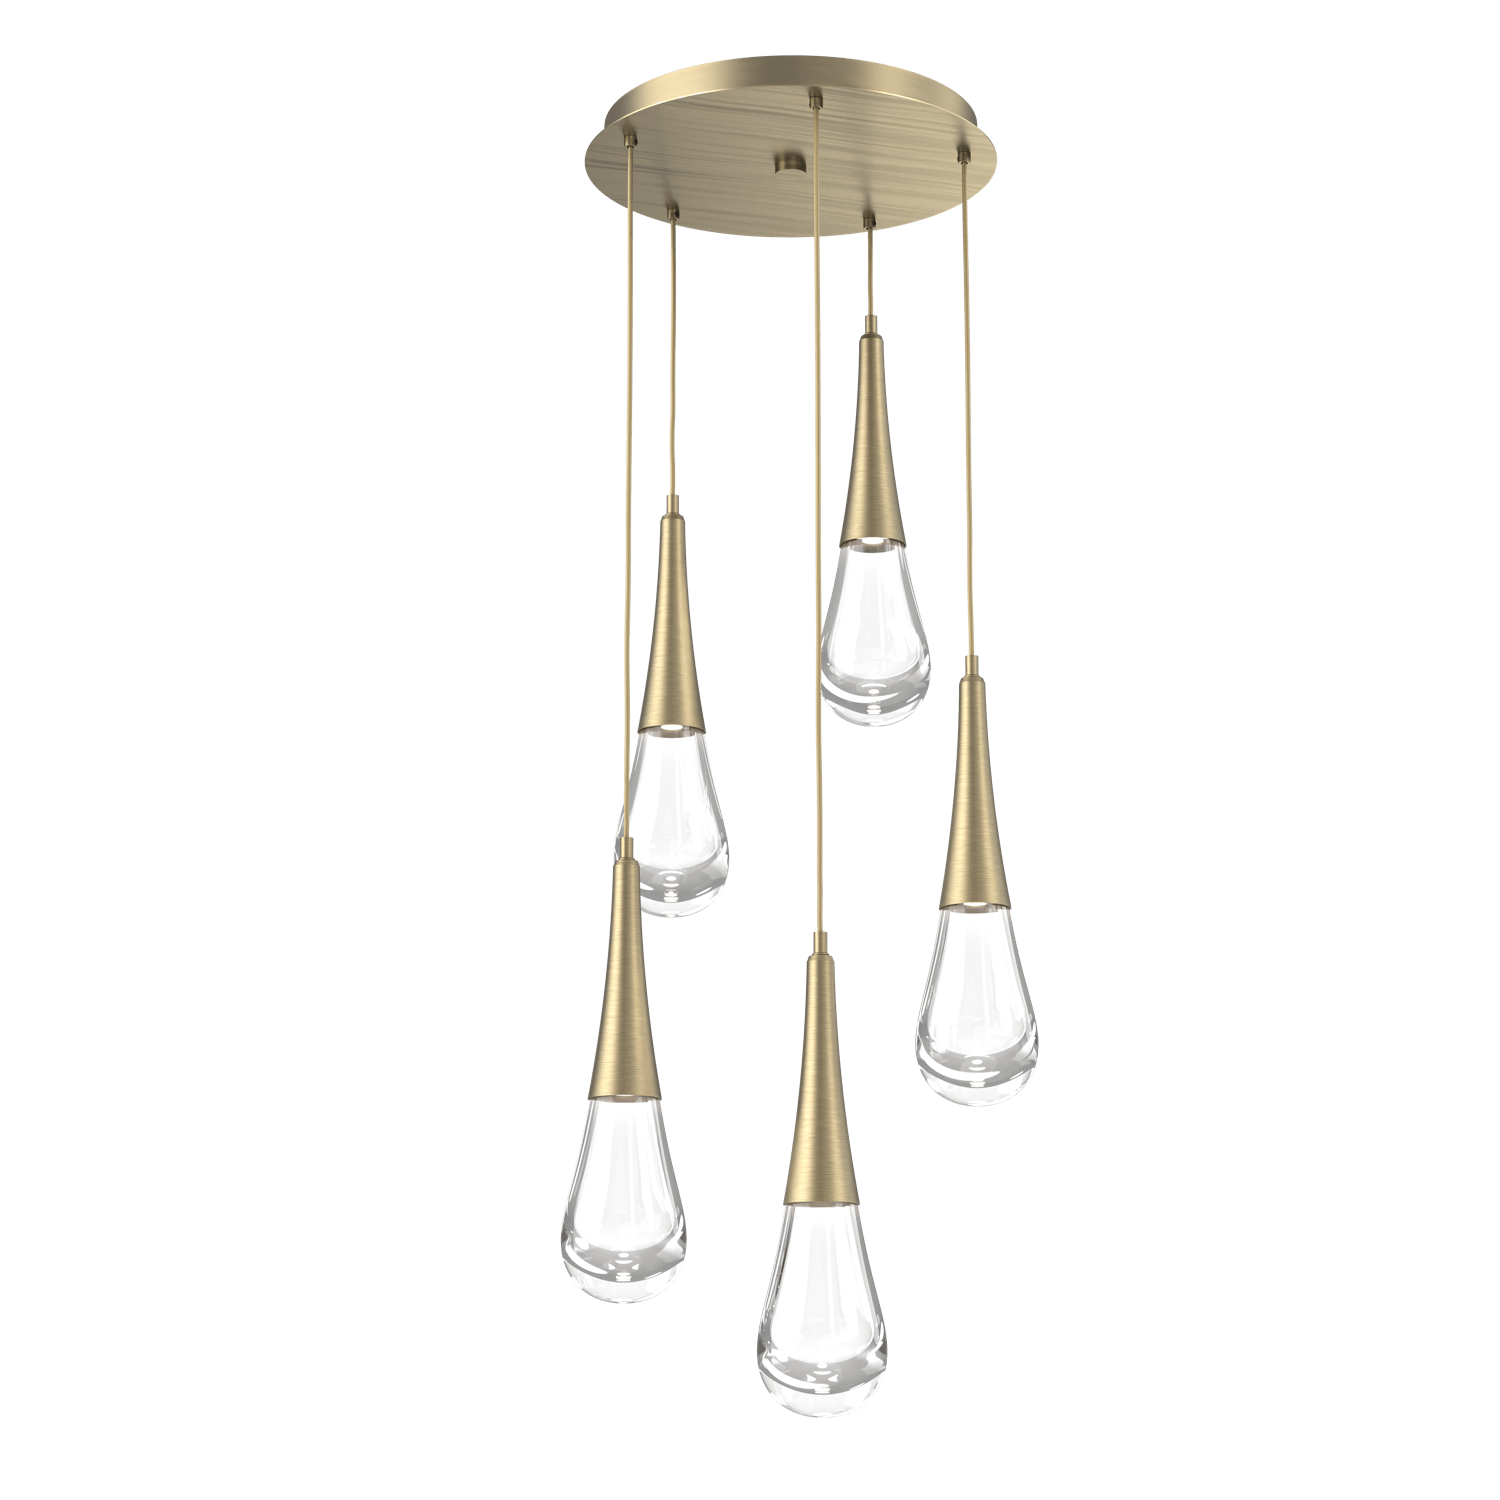 CHB0078-05-HB-Hammerton-Studio-Raindrop-5-light-round-pendant-chandelier-with-heritage-brass-finish-and-clear-blown-glass-shades-and-LED-lamping